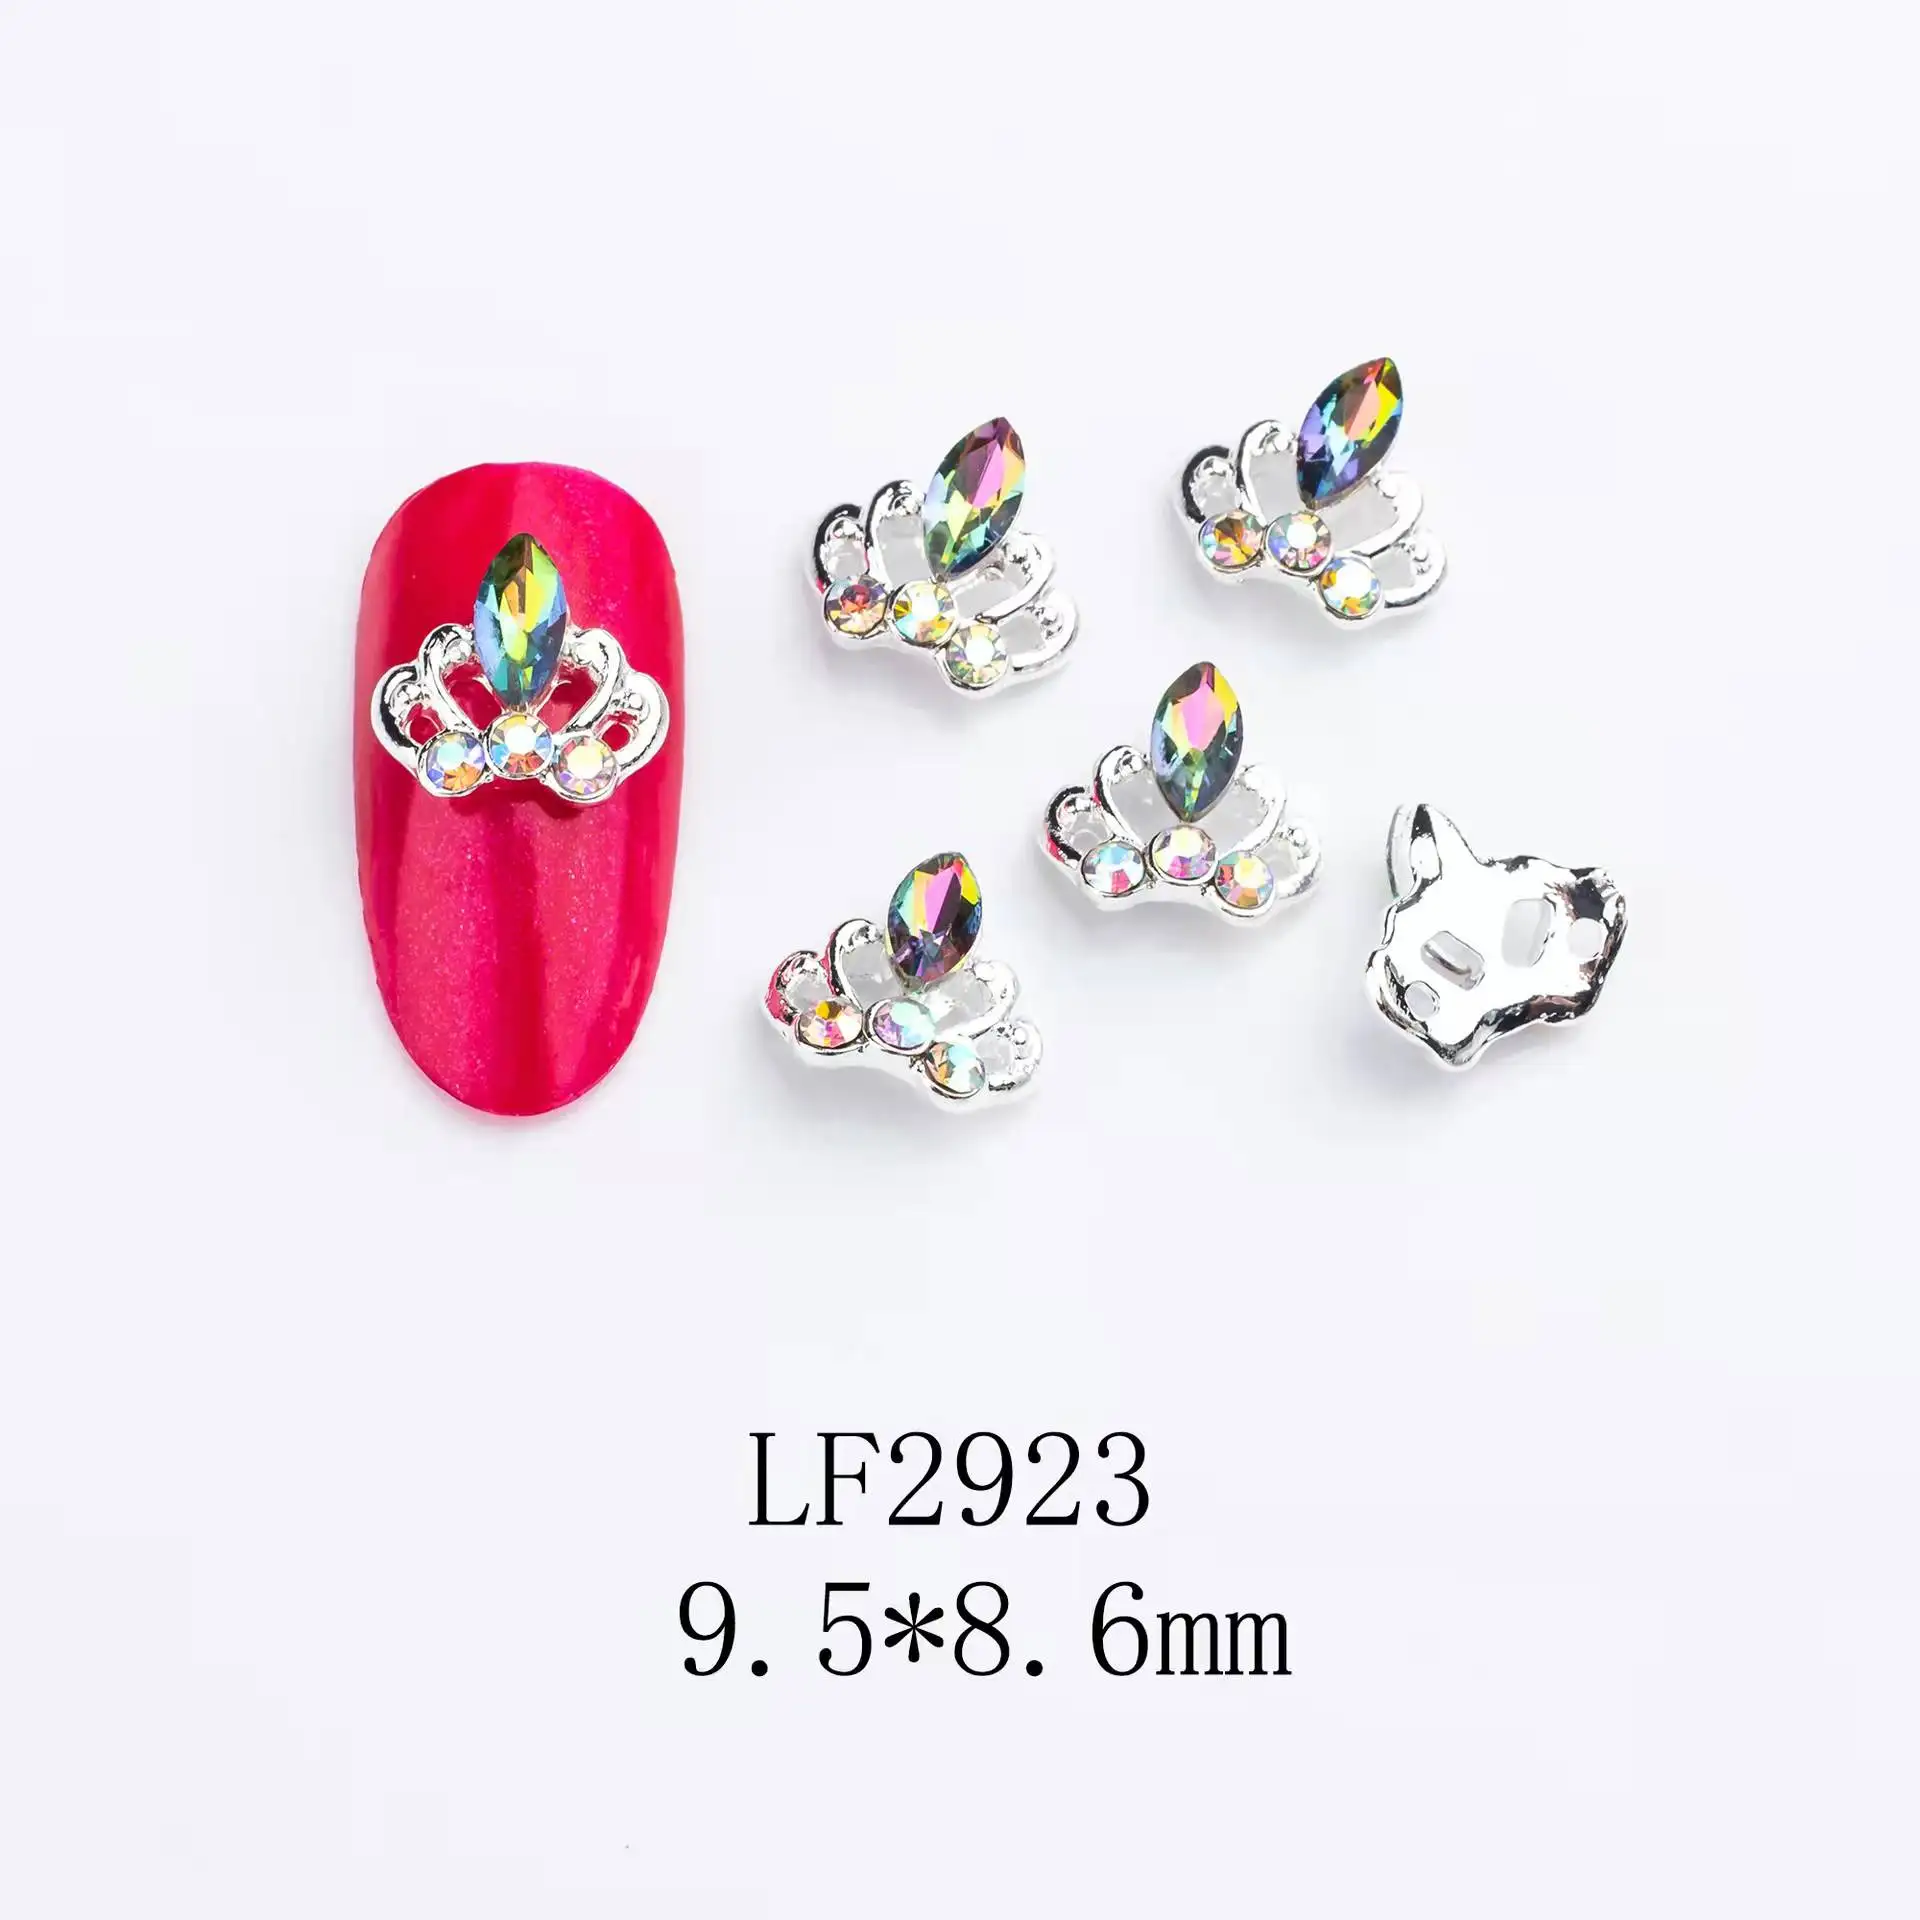 100Pcs Royal Crown Shiny Nail Art Rhinestones Crystal Romantic Design 3D Charms Crown/Heart/Snow Jewelry For Nails Accessories enlarge